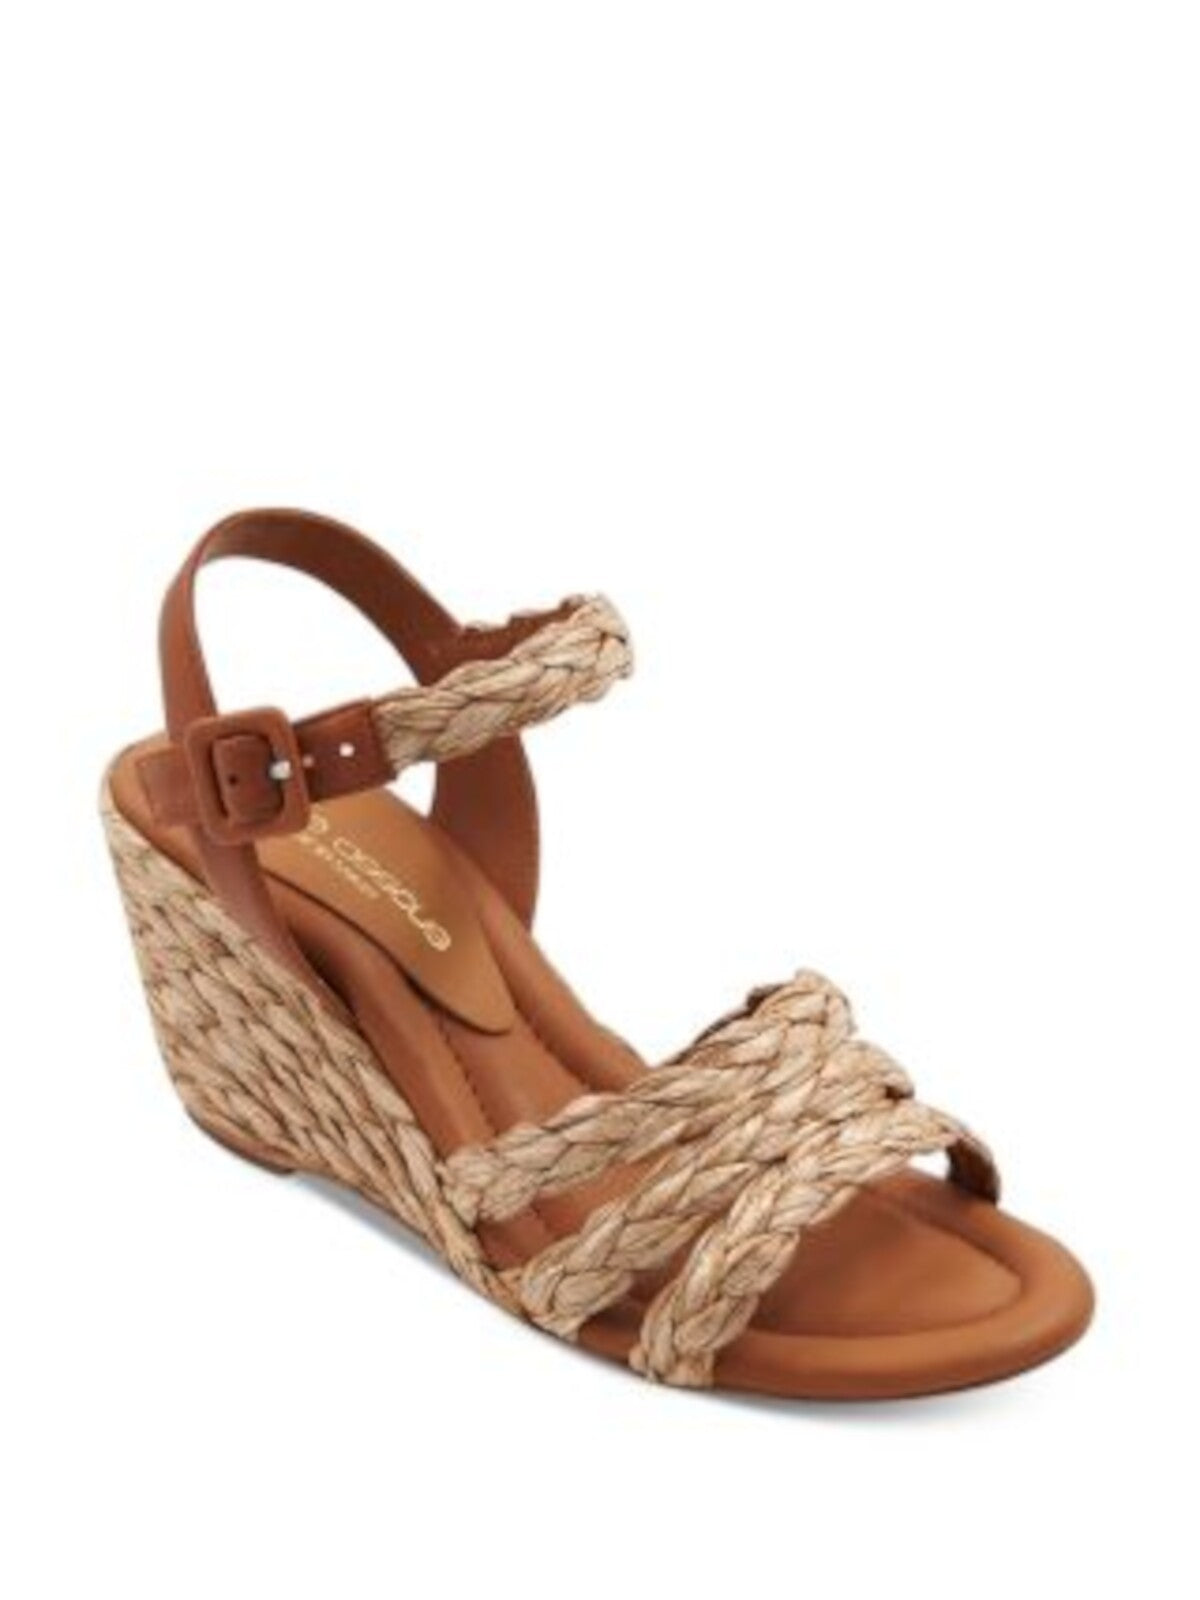 ANDRE ASSOUS Womens Beige Raffia Ankle Strap Padded Milena Open Toe Wedge Buckle Espadrille Shoes 38